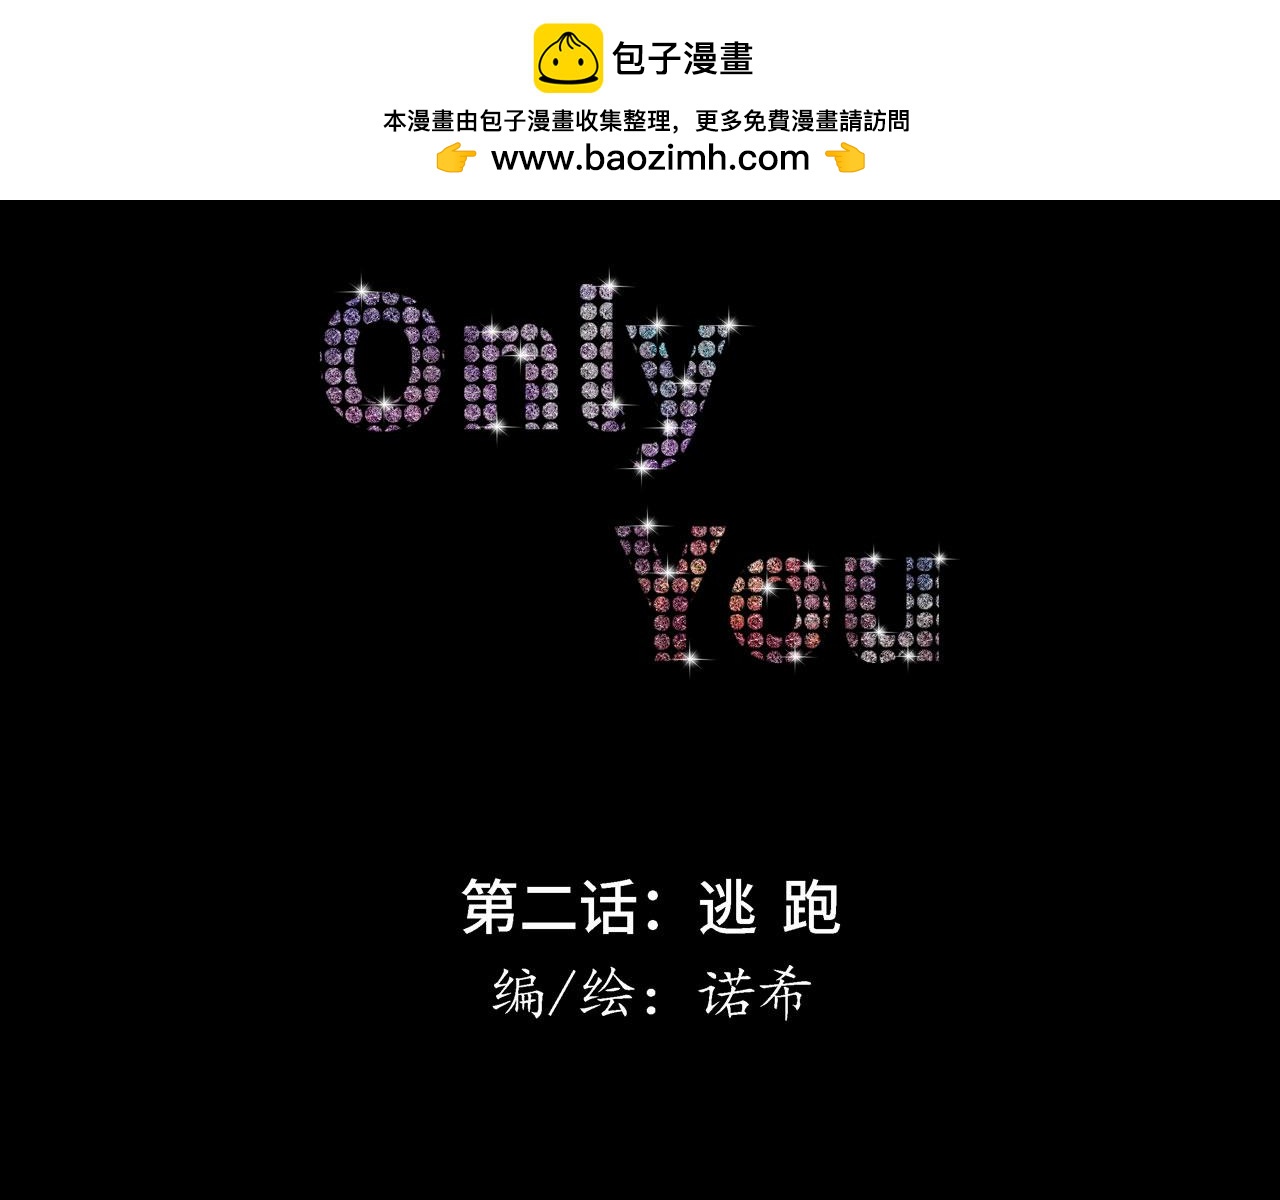 Only You - 第二話 逃跑(1/3) - 2